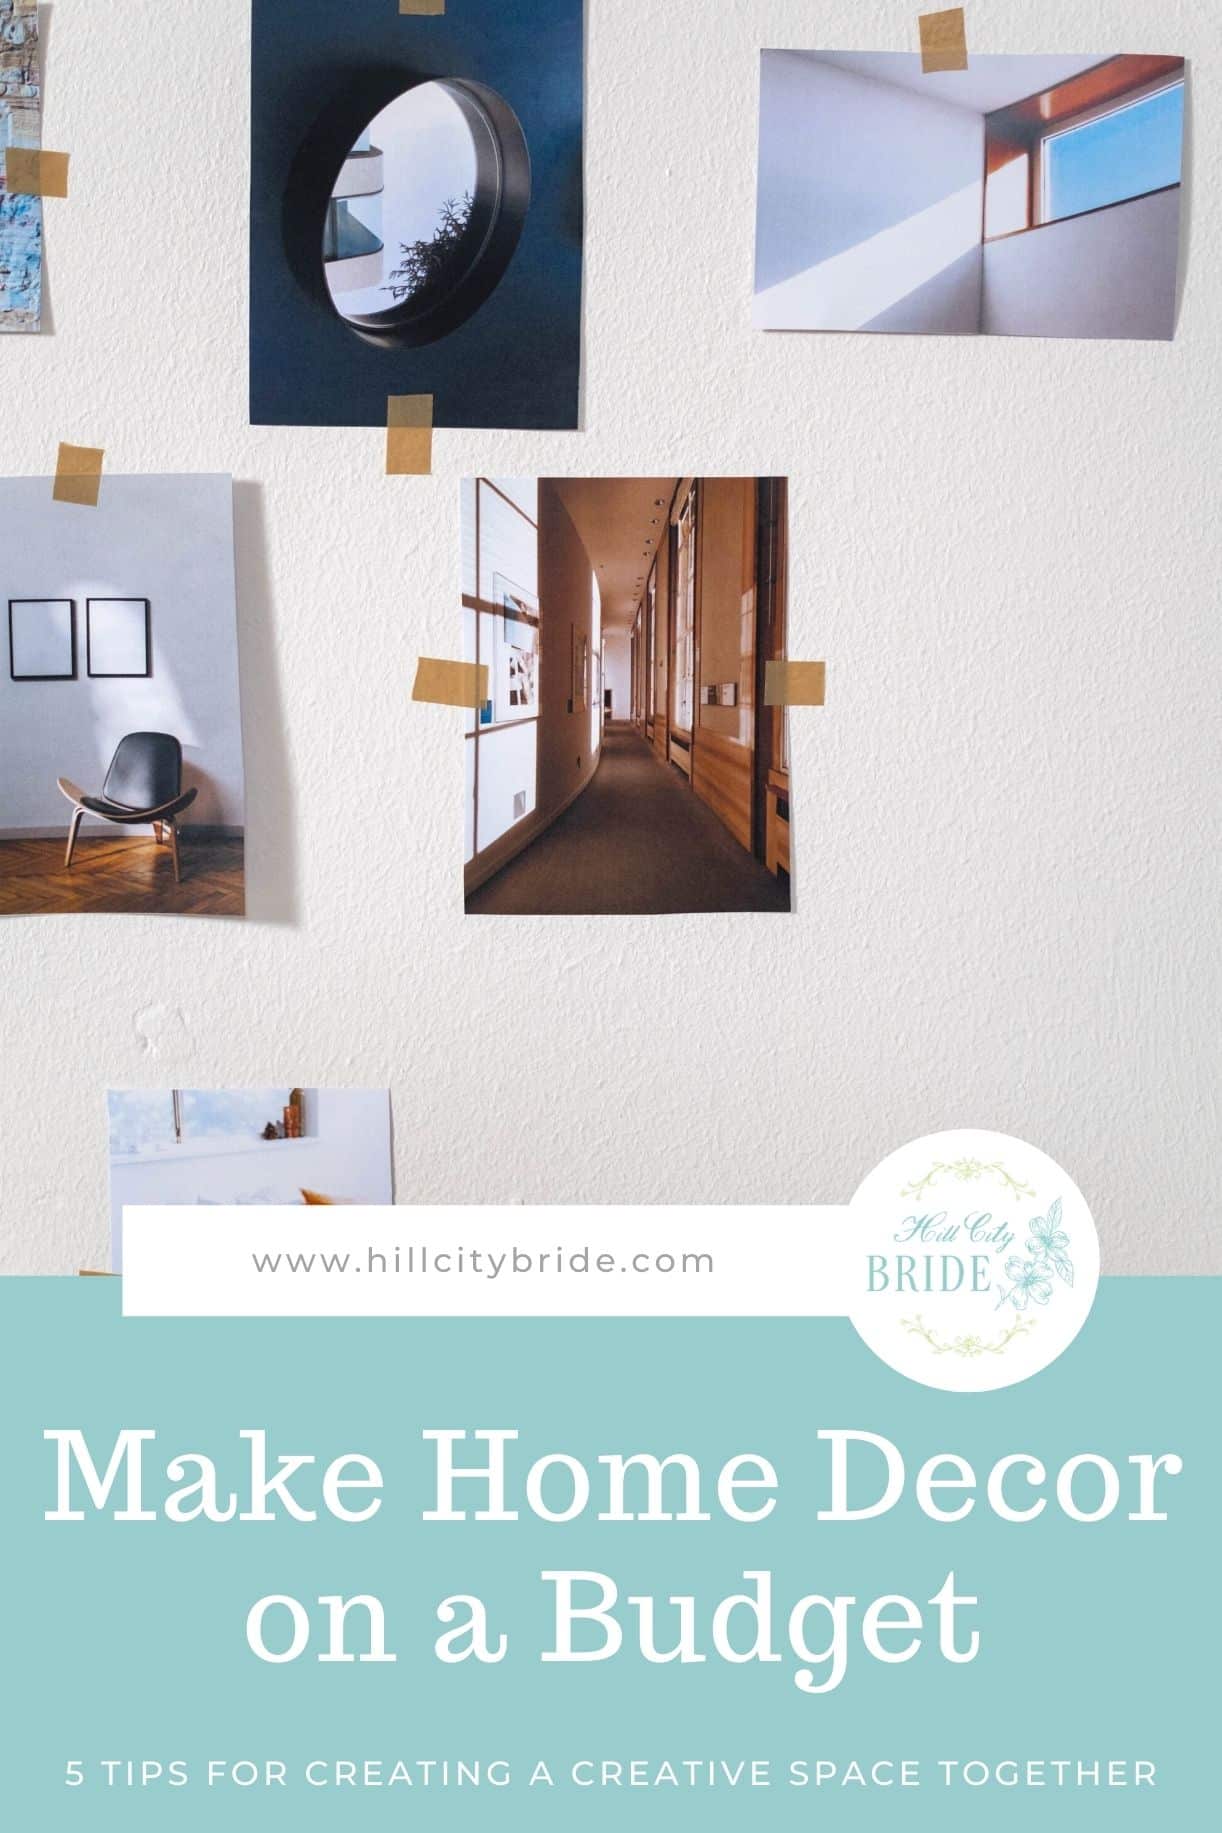 Tips on How to Make Home Decor on a Budget